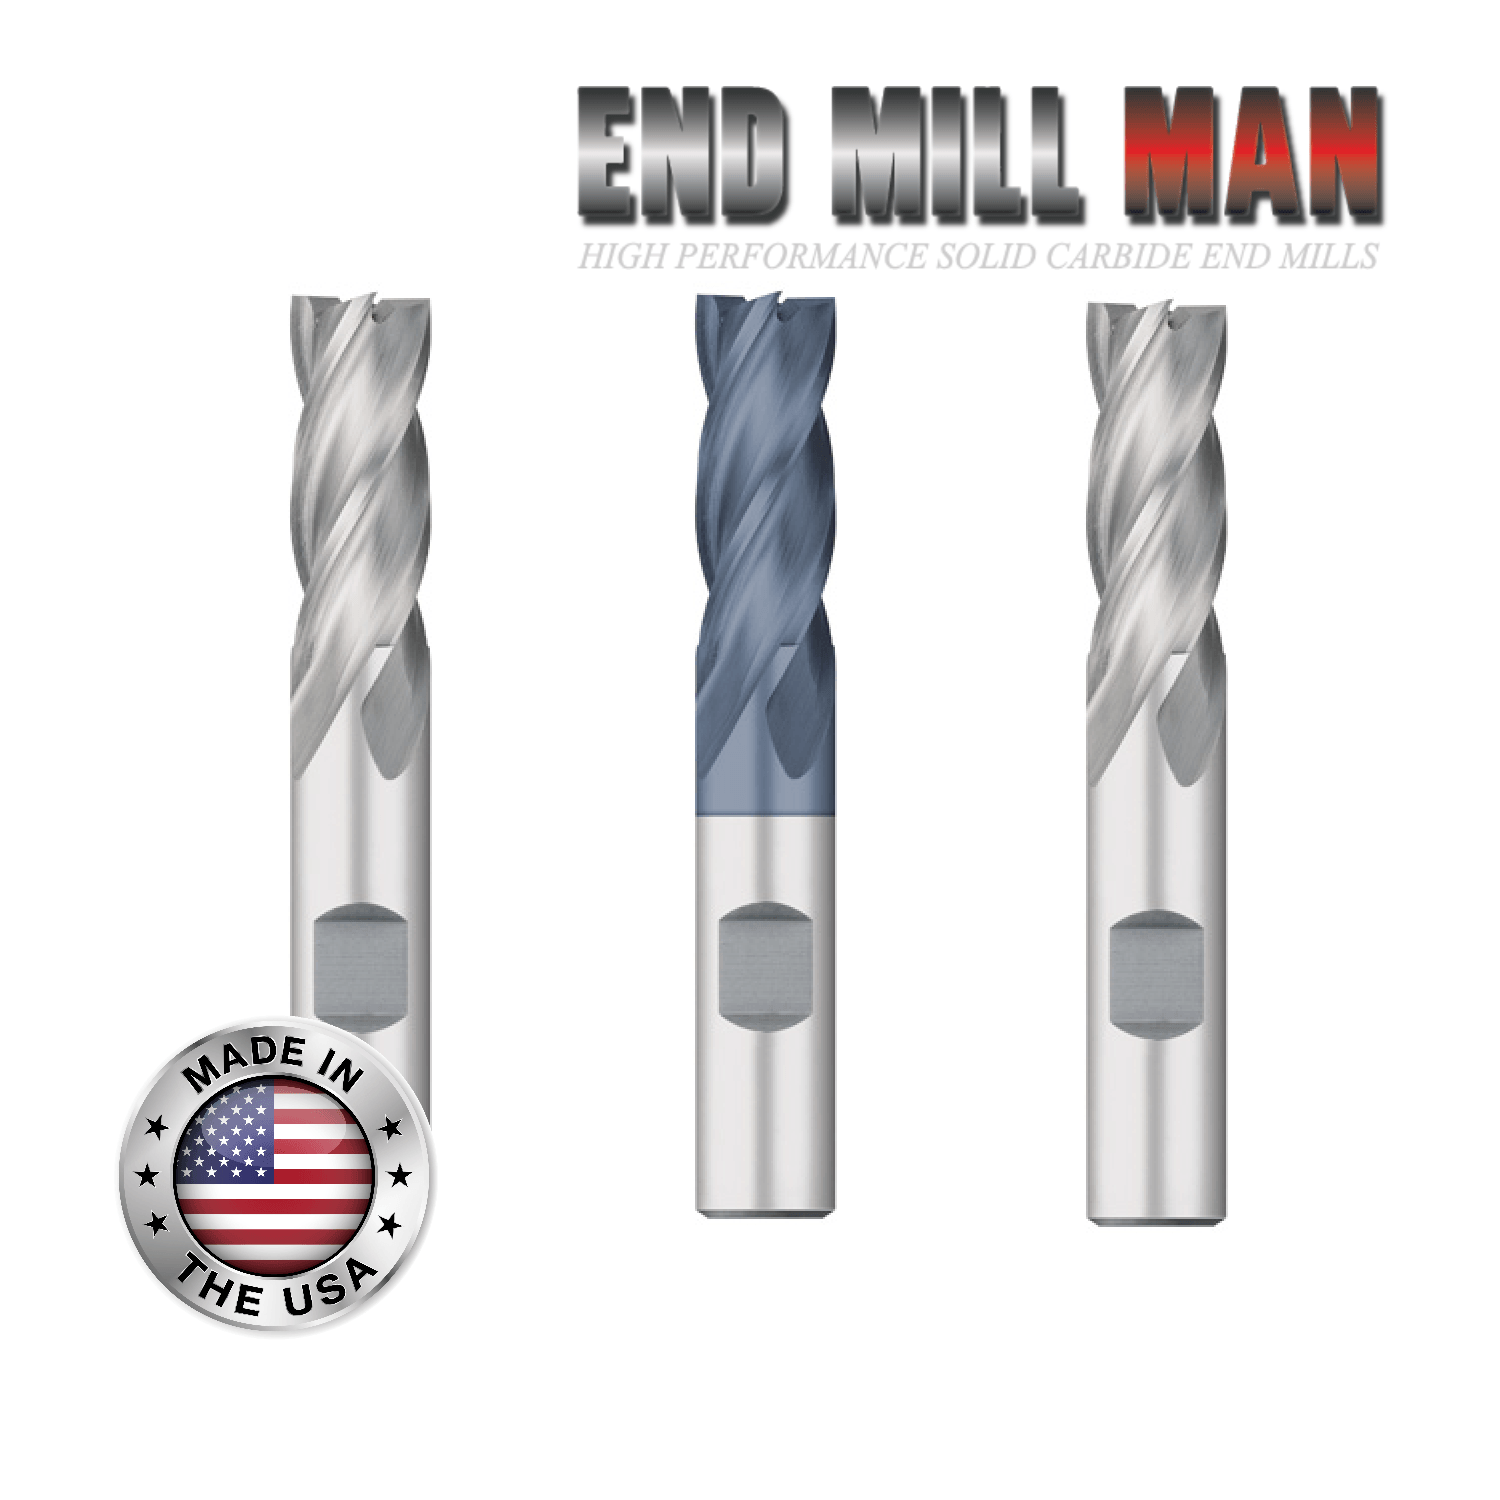 13/16" x 1-7/8" LOC (3 Pack) HSS 4 Flute End Mills (3/4" Shanks) - The End Mill Store 